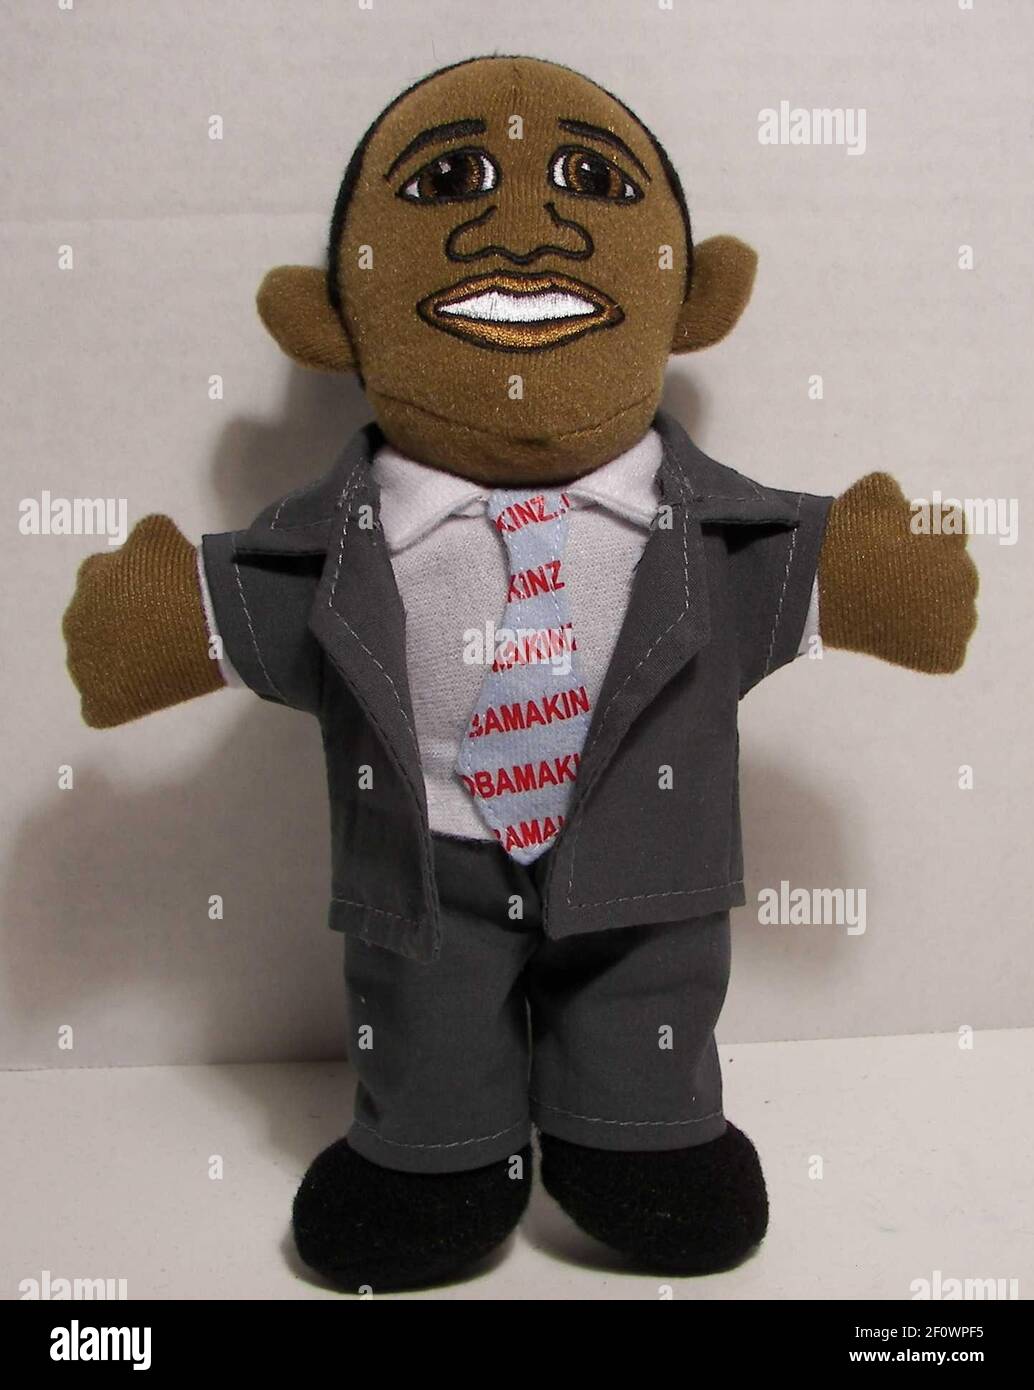 Oxford, CT - A plush 8' Barack Obama 'Obamakinz' Doll. Herobuilders.com is a company based out of Connecticut that makes political, pop culture and custom action figures. Photo Credit: Herobuilders.com/Sipa Press/0803191943 Stock Photo